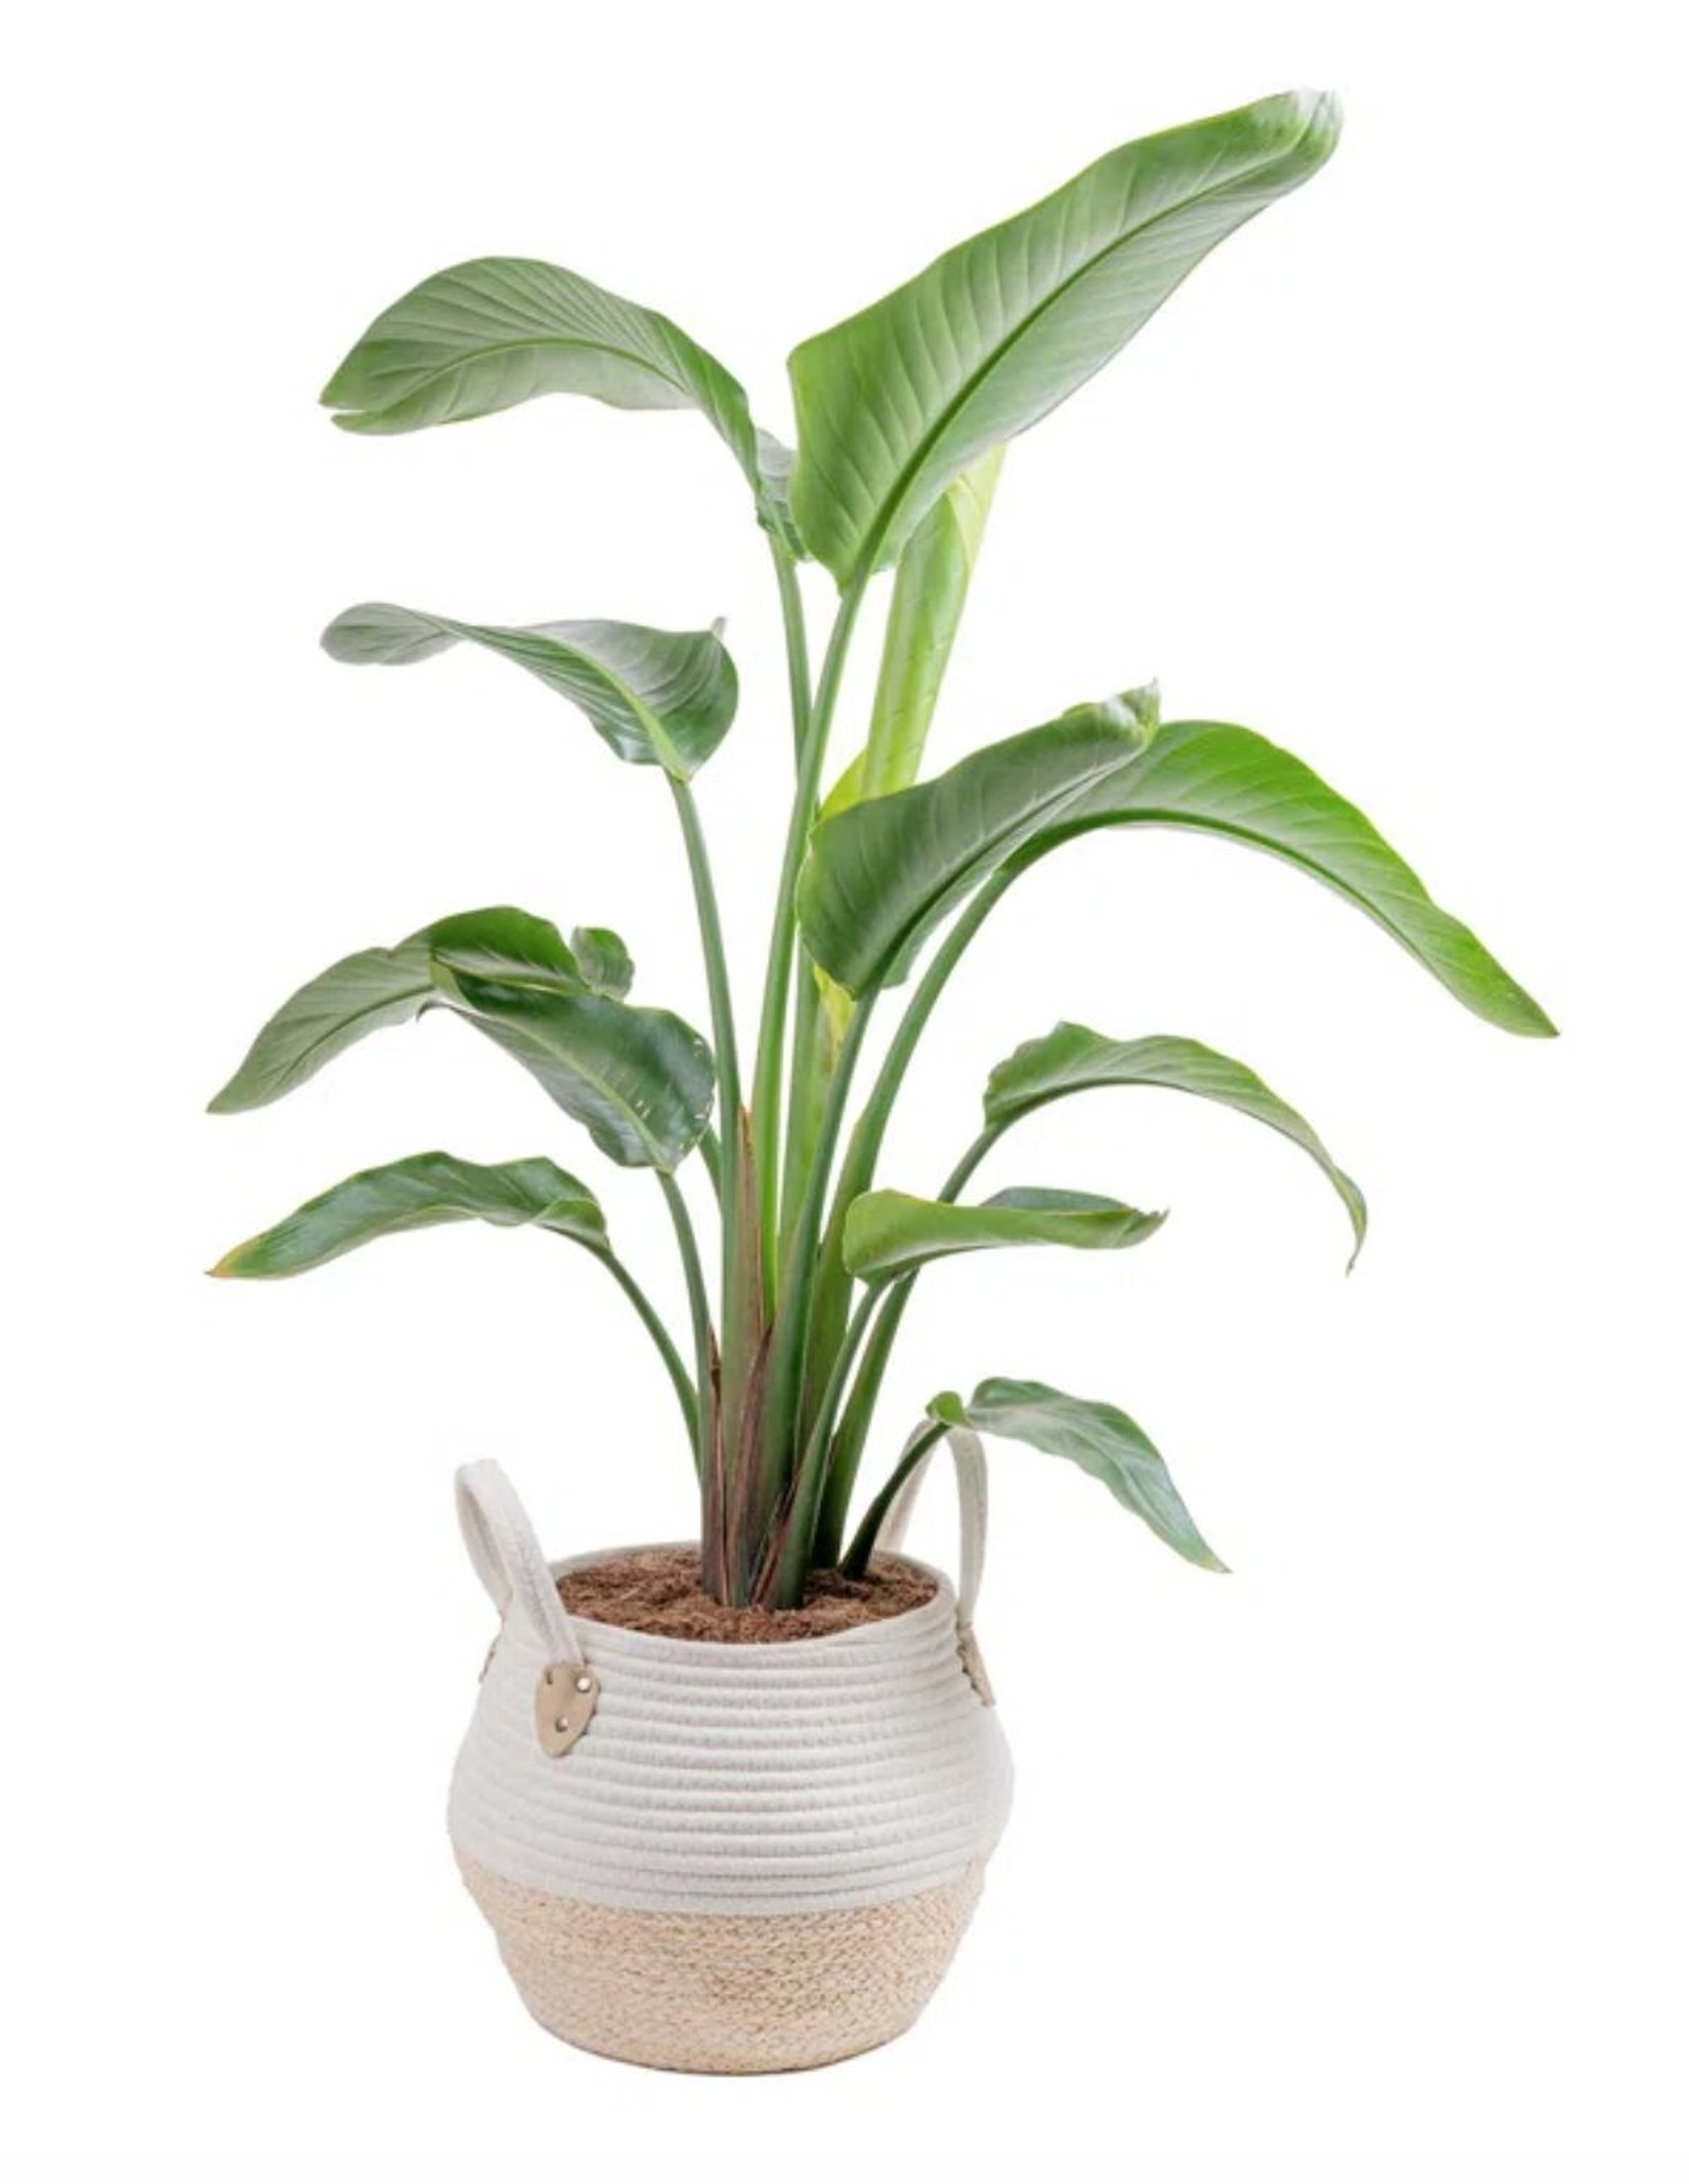 Costa Farms Live White Bird of Paradise Low Maintenance Plant in Weave Basket 10-in Pot - AllModern